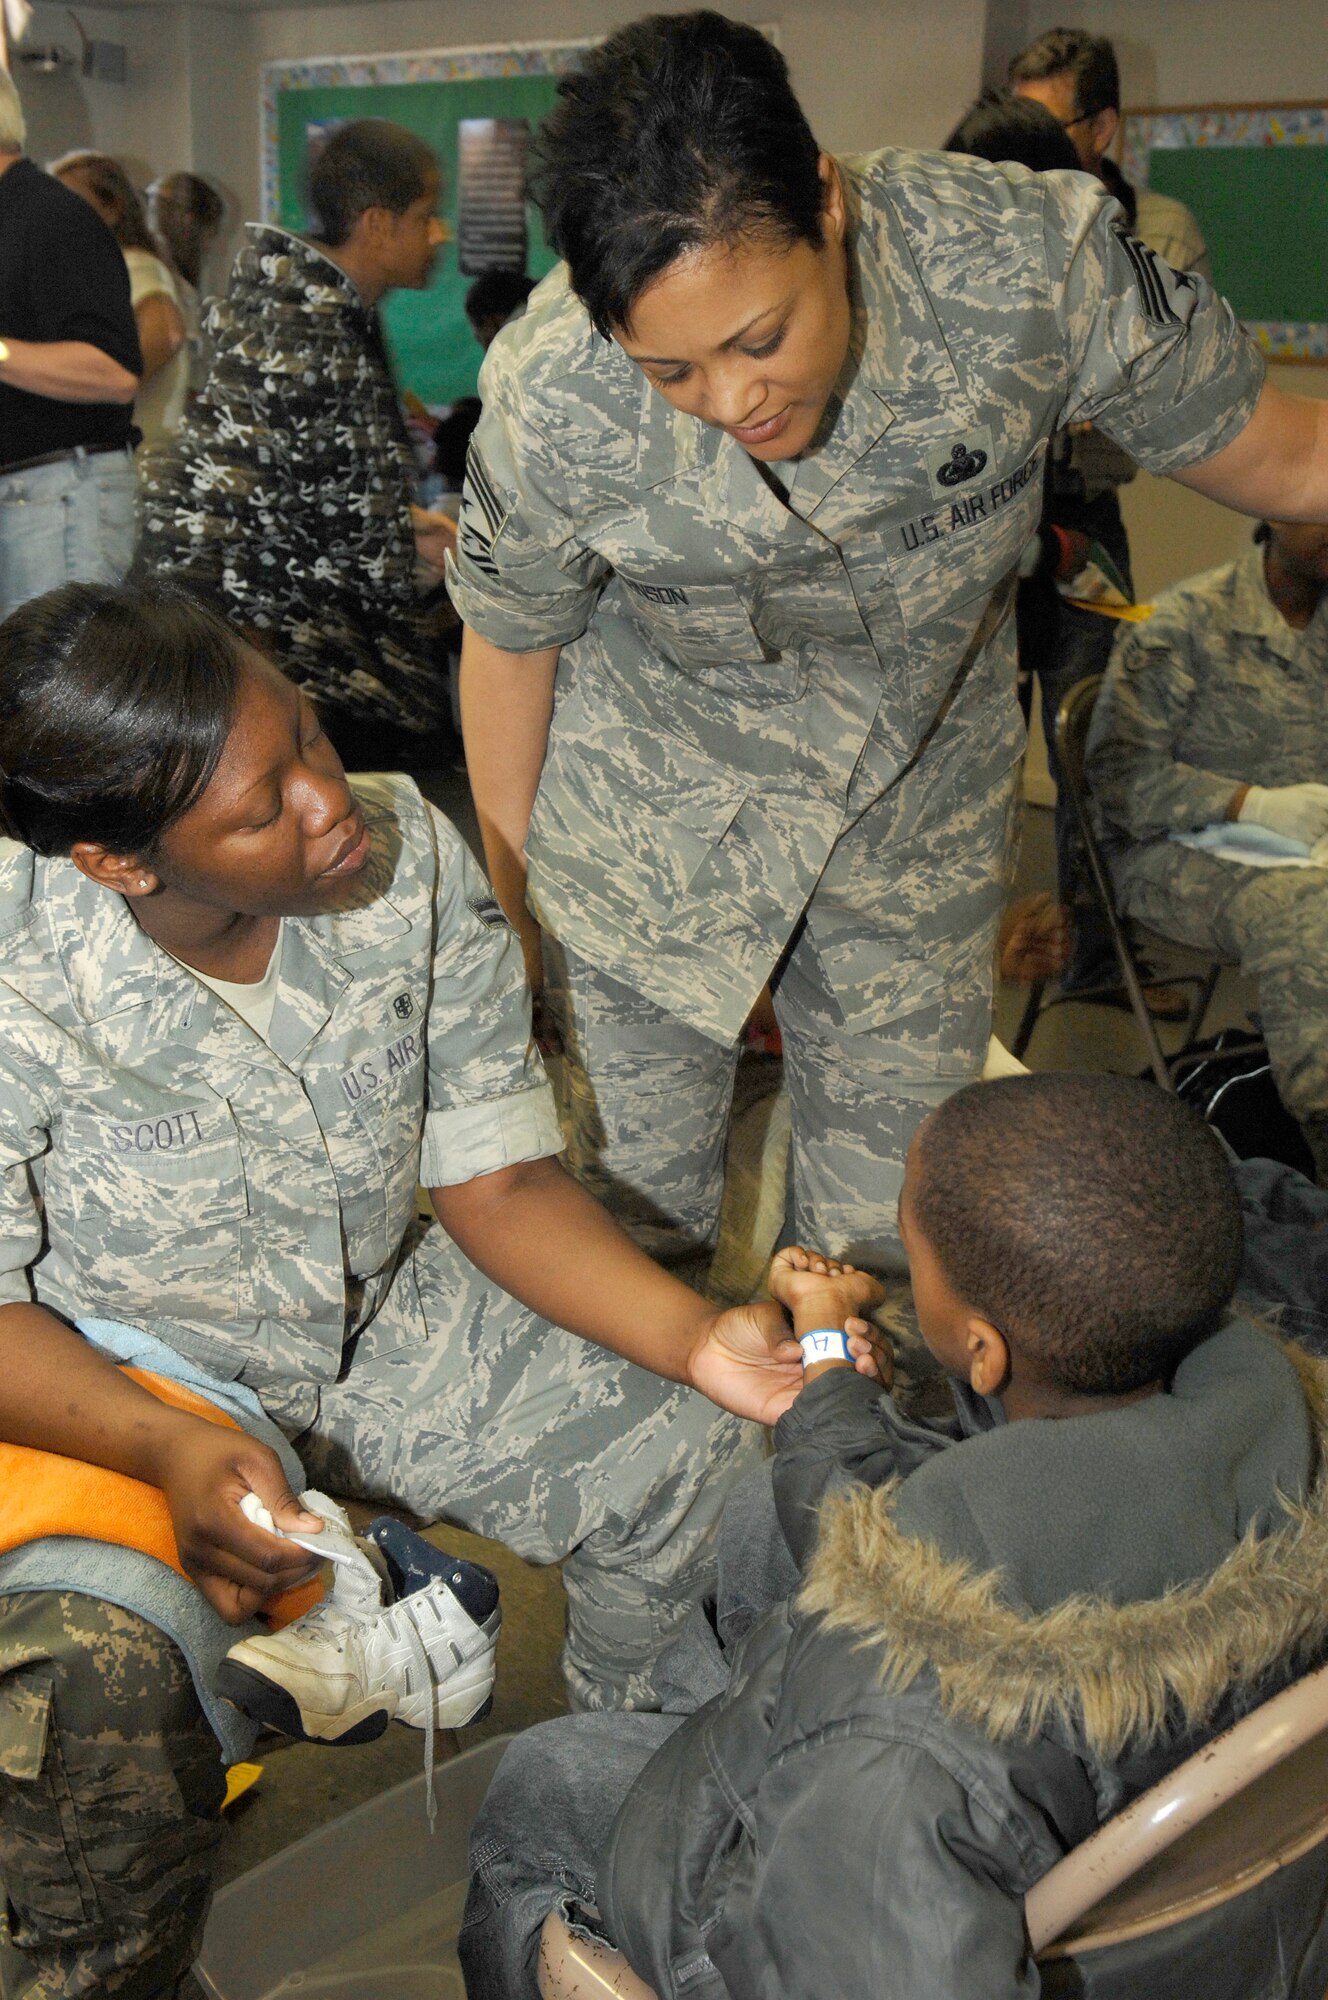 Chief Master Sgt. Robin Johnson, 11th Wing Command Chief Master Sergeant, and Airman 1st Class Amanda Scott, 579th Medical Group, help a child get new shoes and socks during a community event April 4.  More than 1,000 pairs of shoes were handed out to D.C. children during the event, sponsored by Samaritan’s Feet. (U.S. Air Force photo by Staff Sgt. Dan DeCook)